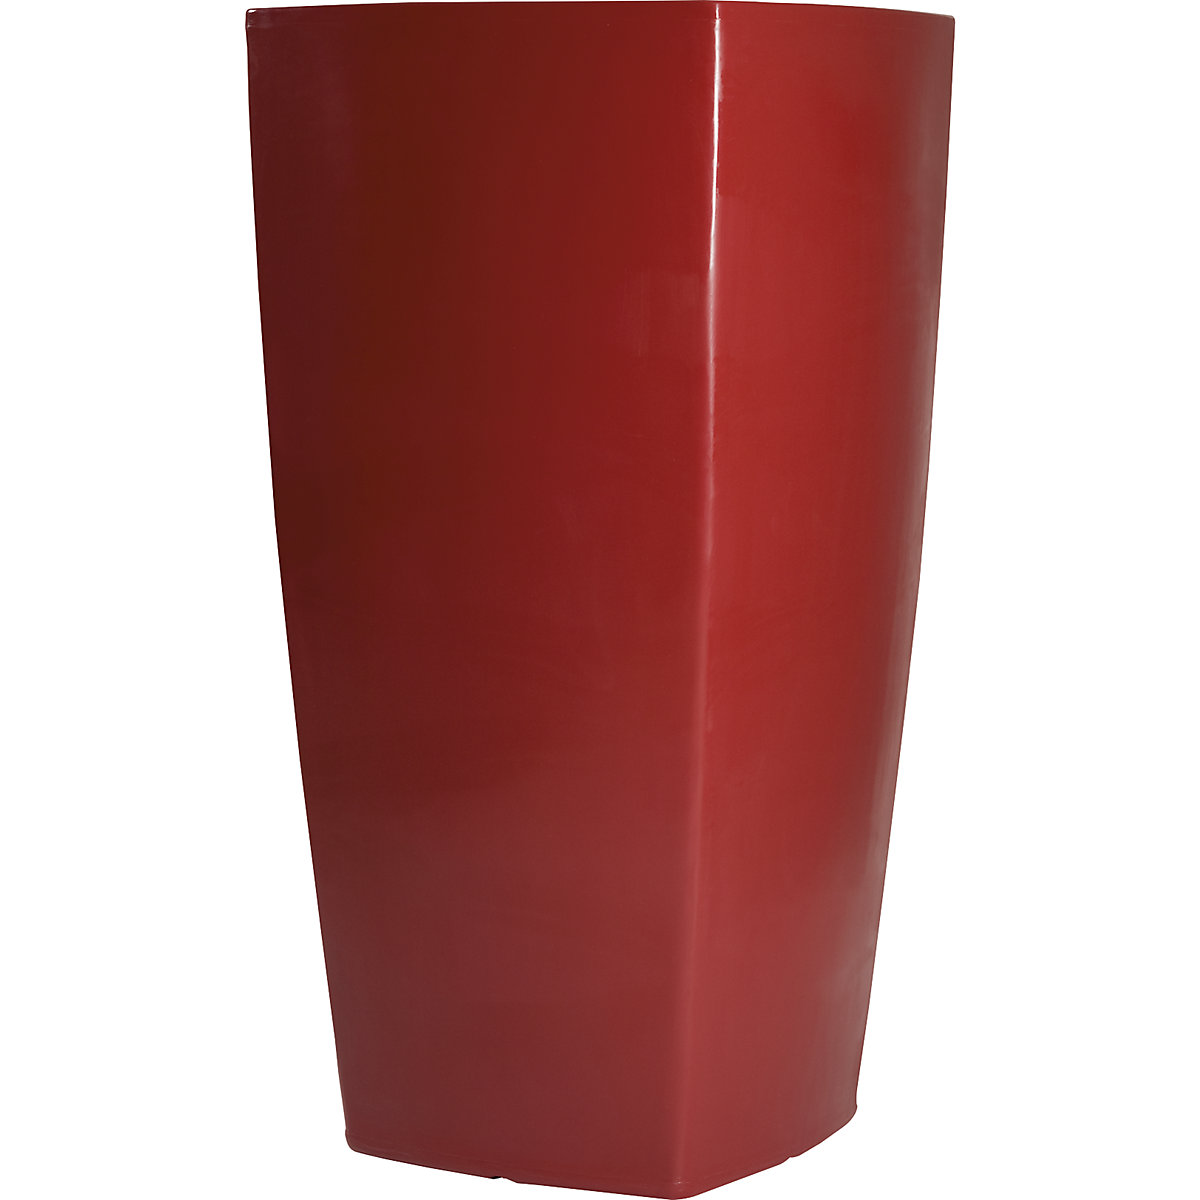 Plant container – DEGARDO, TREVIA III, HxWxD 1100 x 570 x 570 mm, ruby red-5